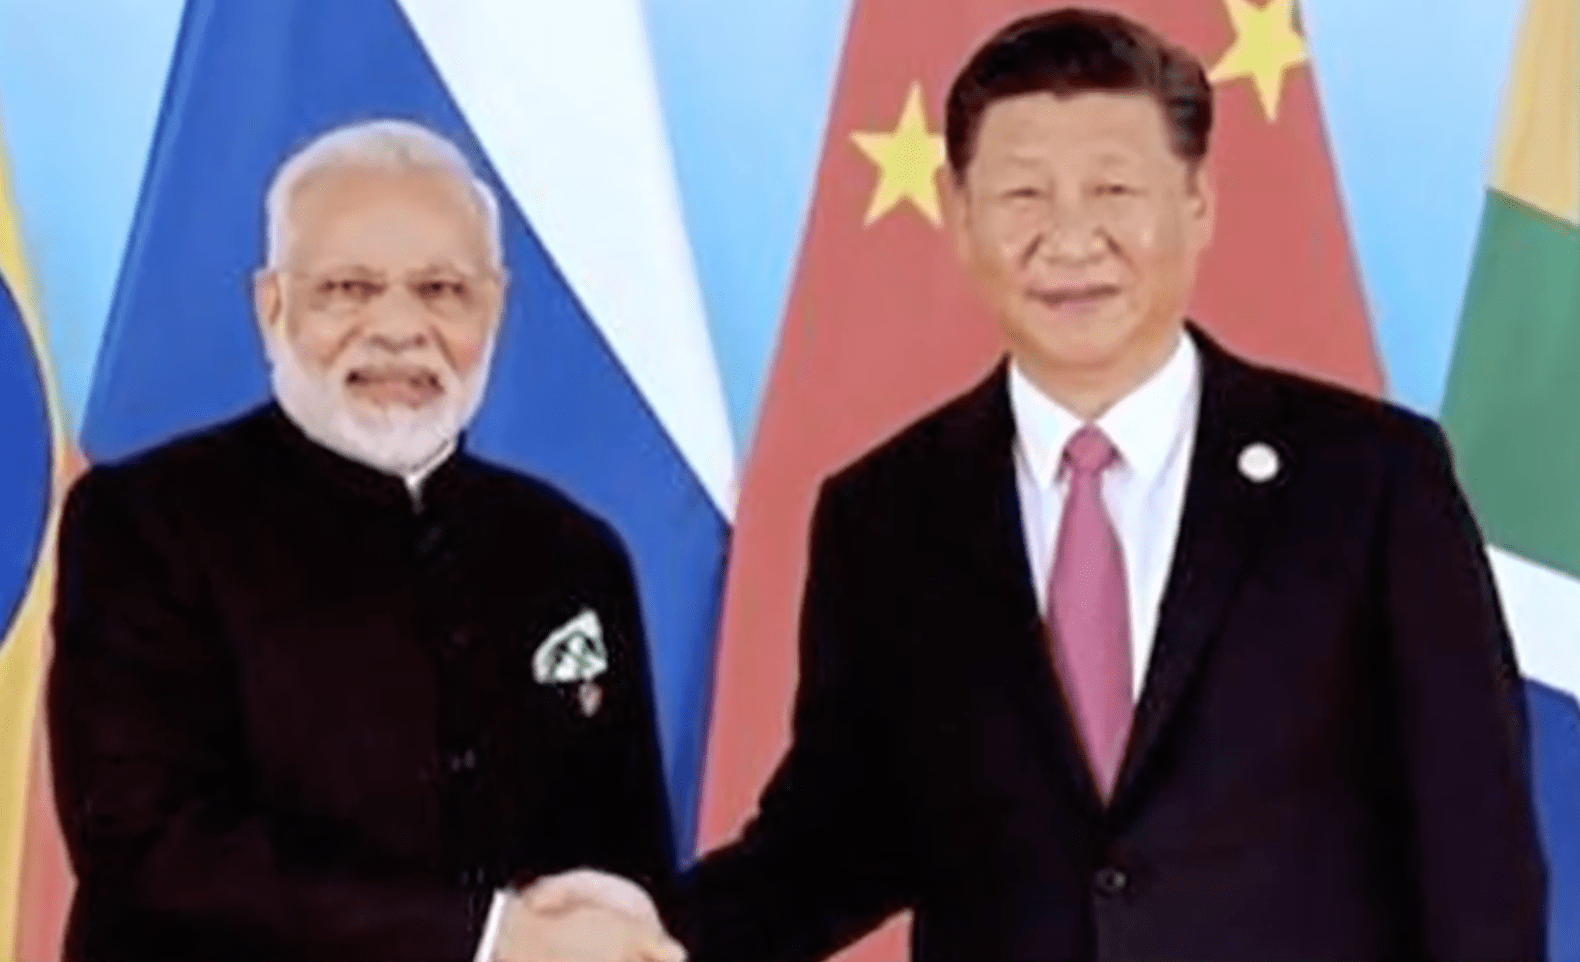 India Attempting to Appease China on Kashmir